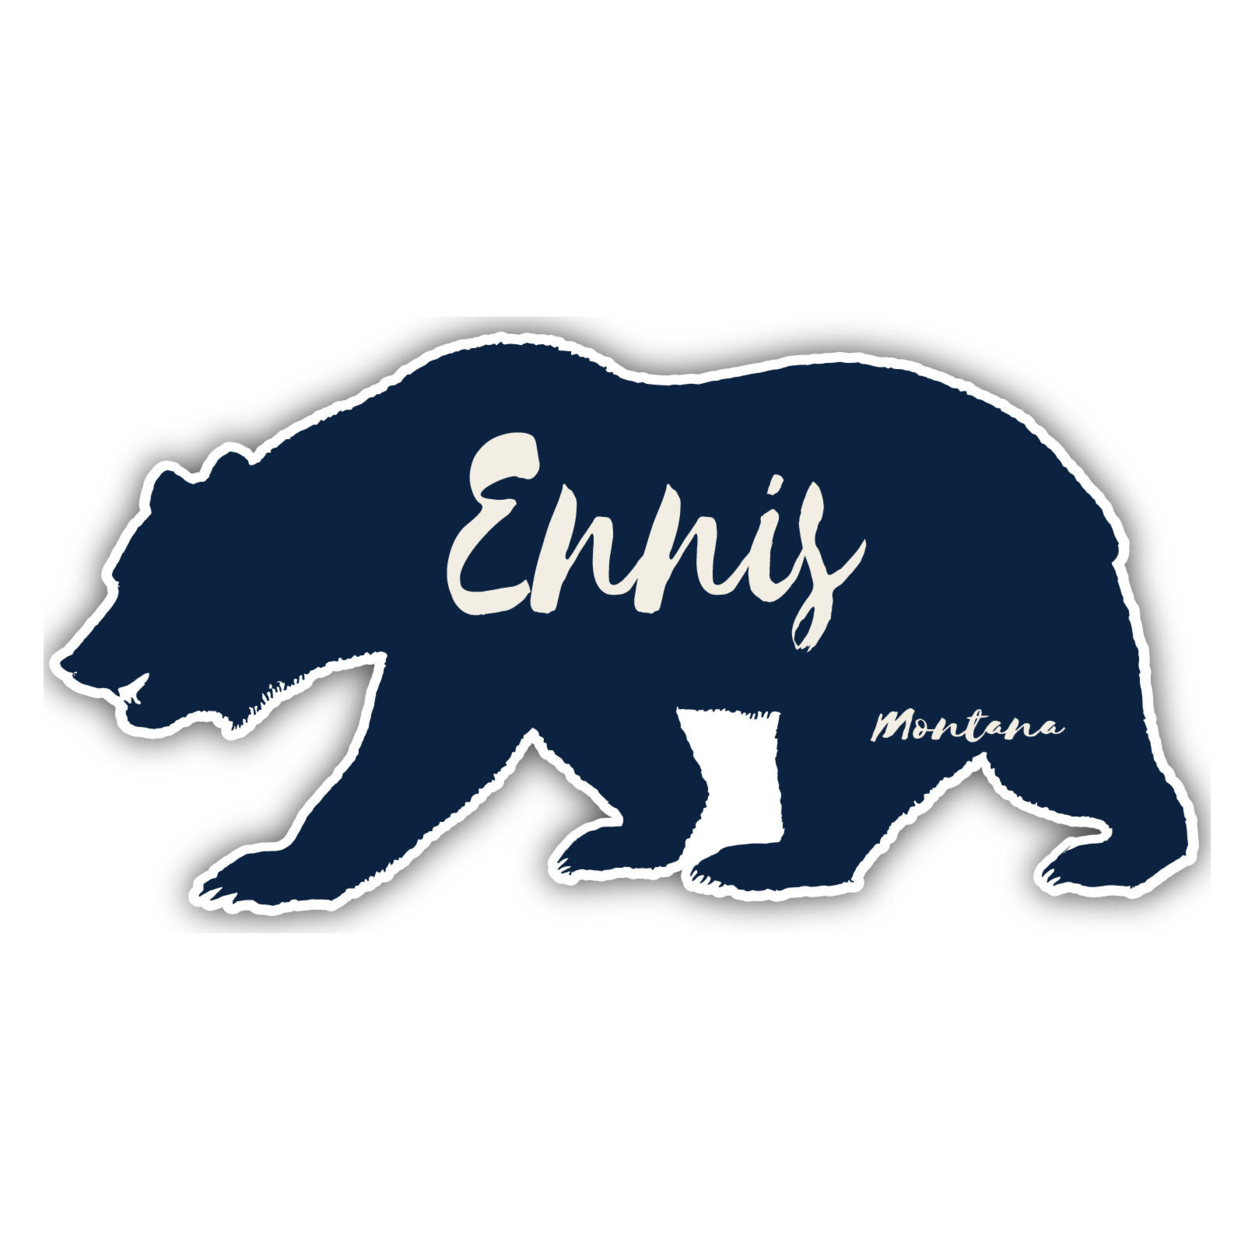 Ennis Montana Souvenir Decorative Stickers (Choose Theme And Size) - 4-Pack, 6-Inch, Great Outdoors